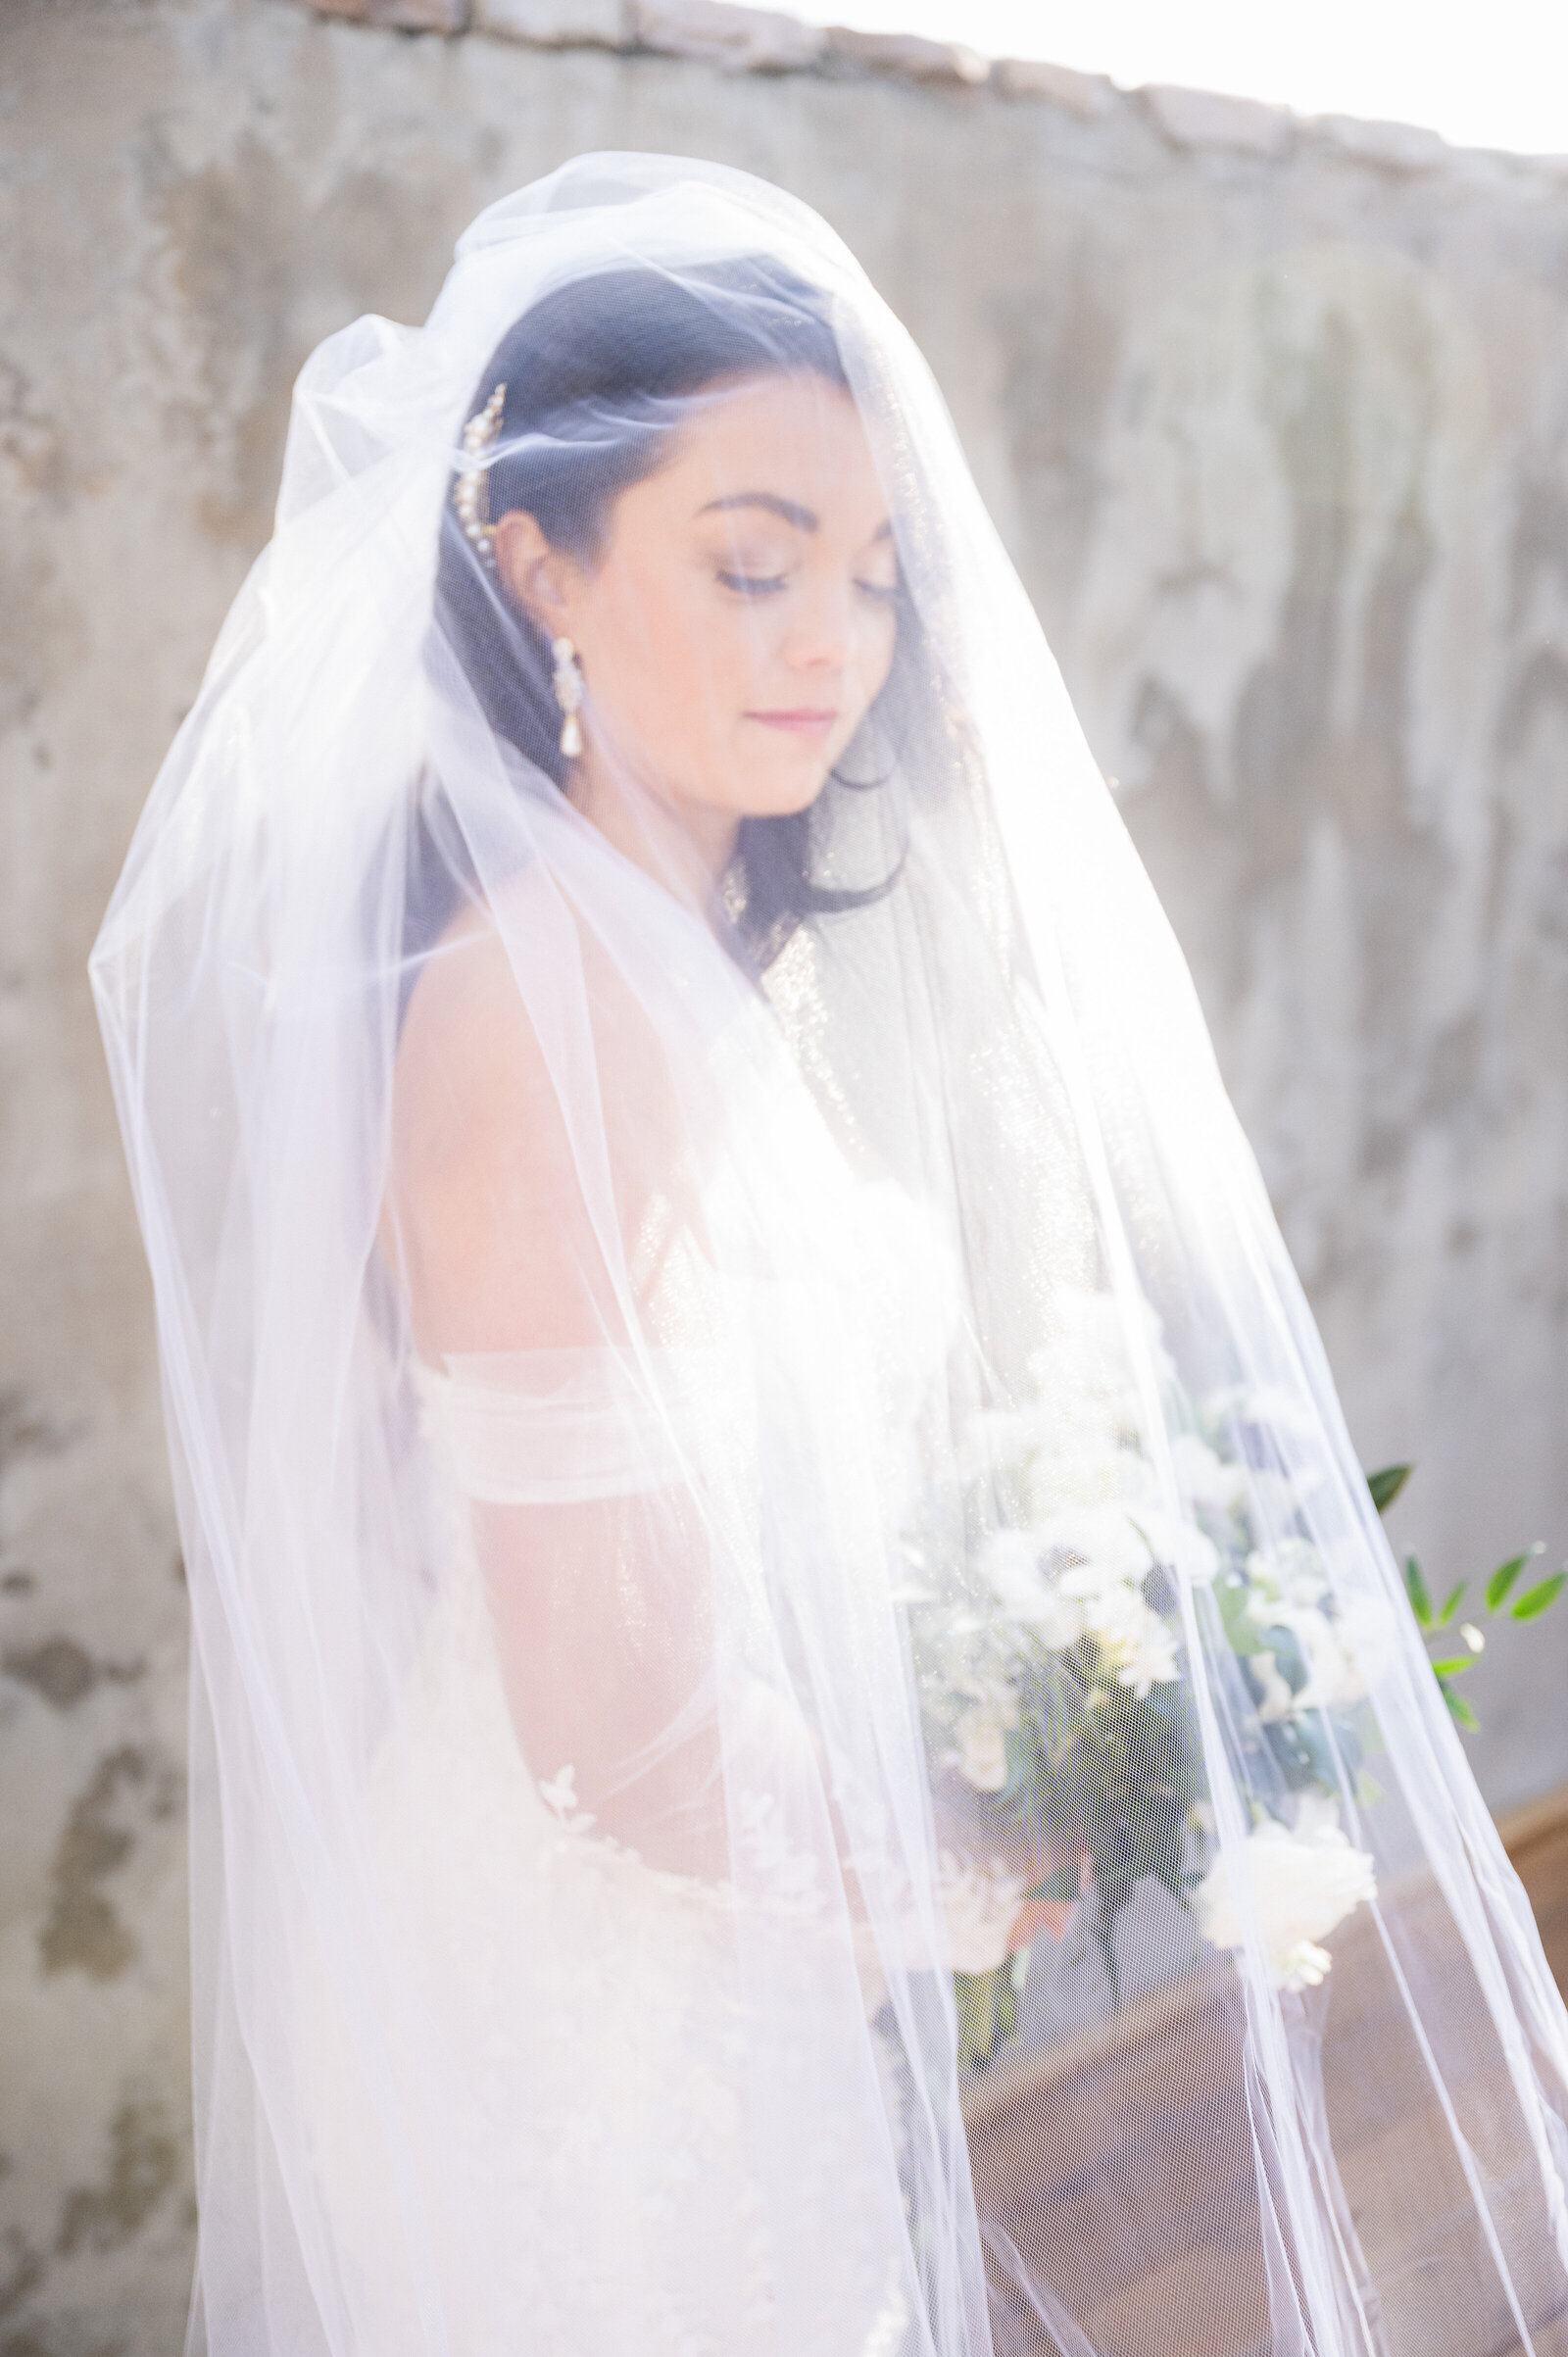 Bride poses for photo with her veil draped over her head at The Oaks at Plum Creek in Castle Rock, Colorado.